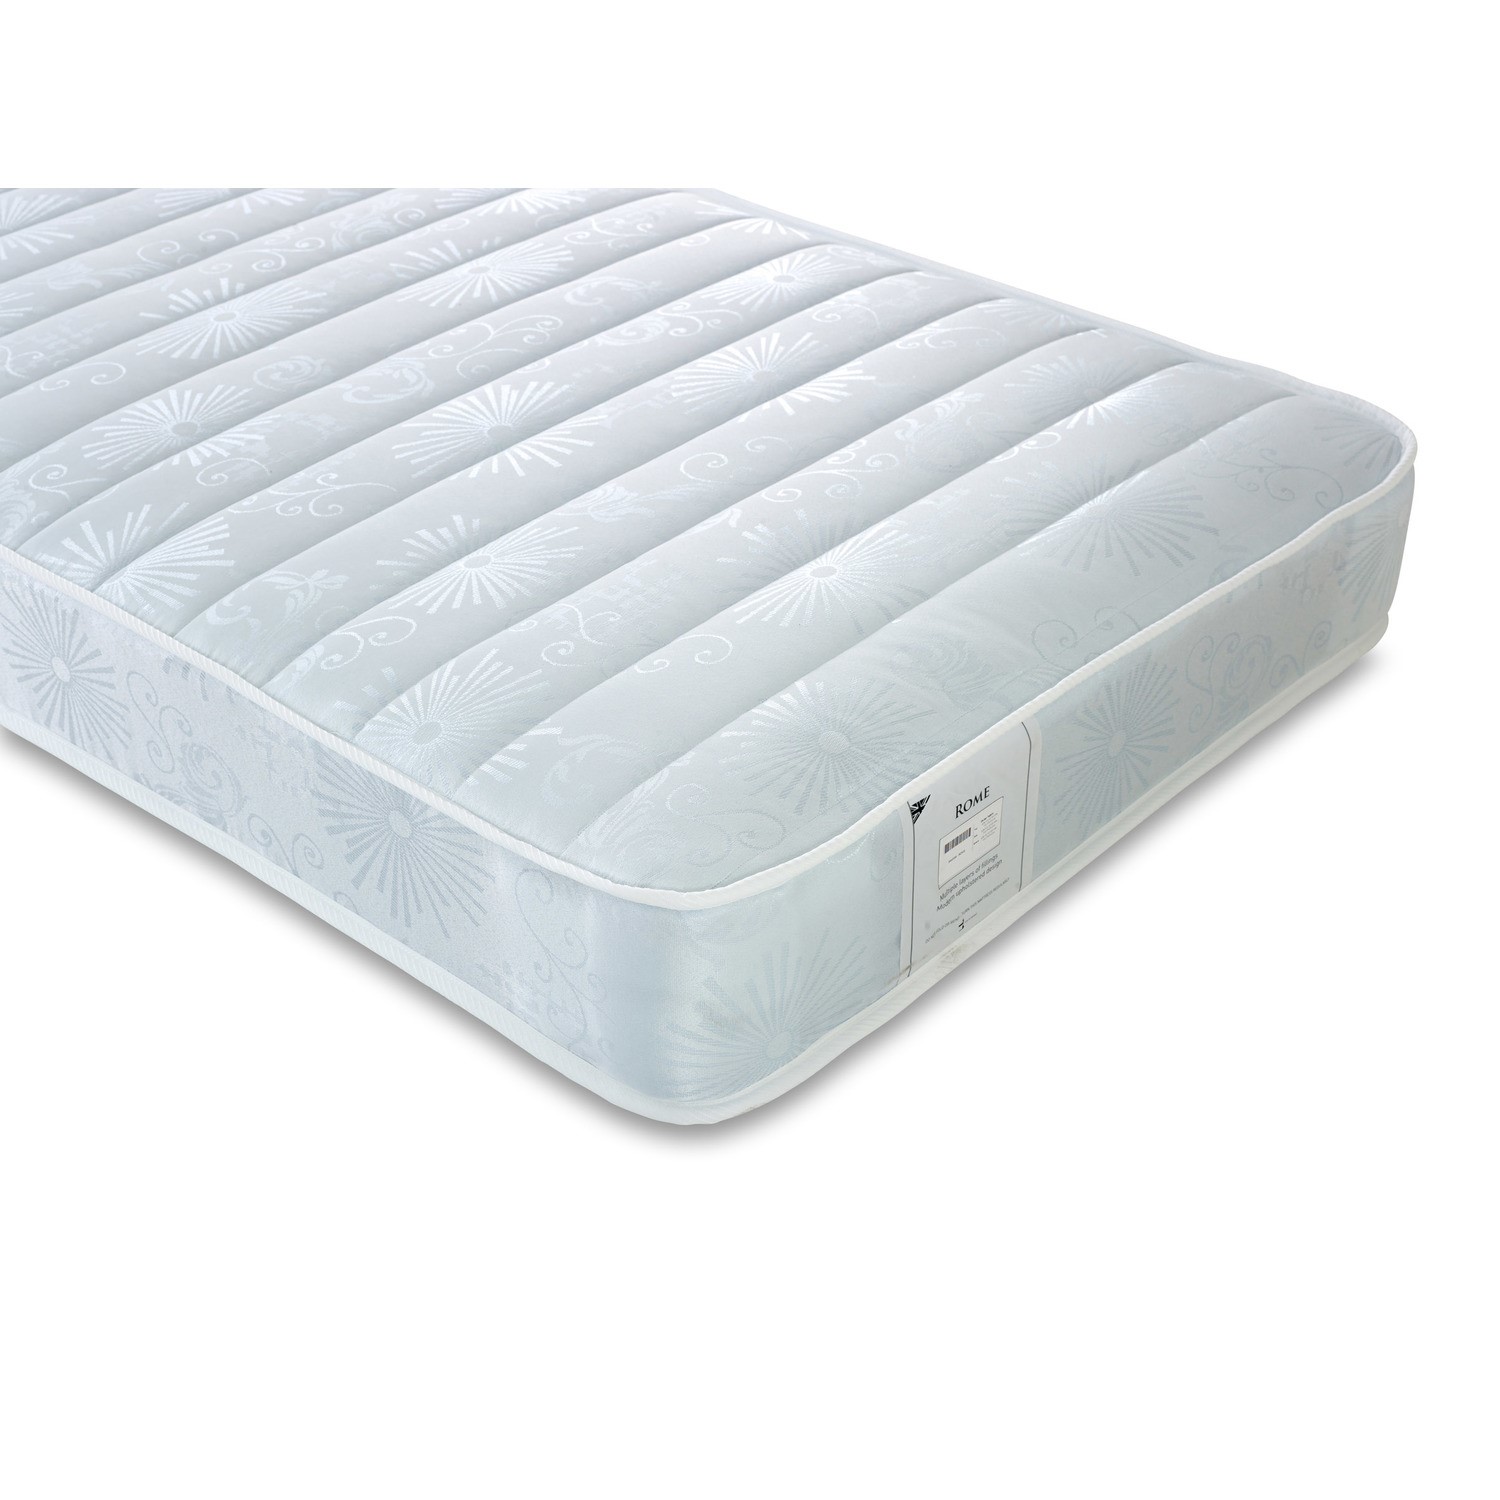 Read more about Single + single coil spring quilted bunk bed mattresses venice